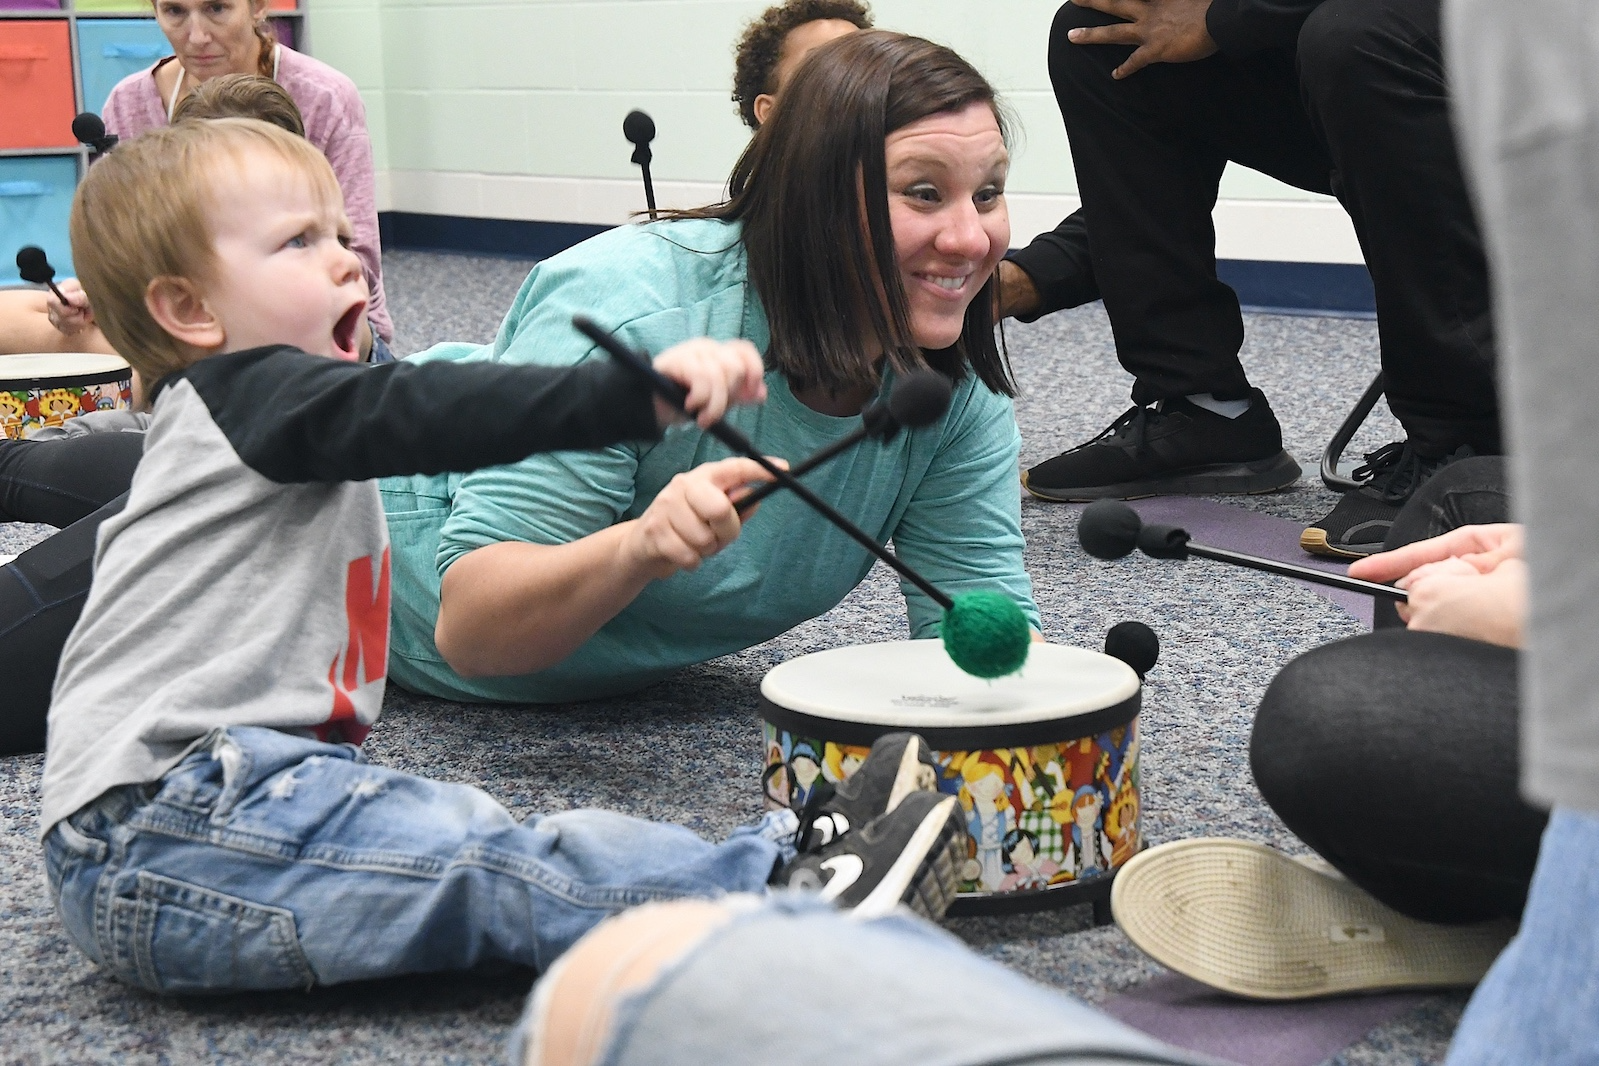 Asher Alexander, 2, shows off his drum skills while instructor Teri Noaeill encourages a younger sibling during a Music First session at the Music Center.